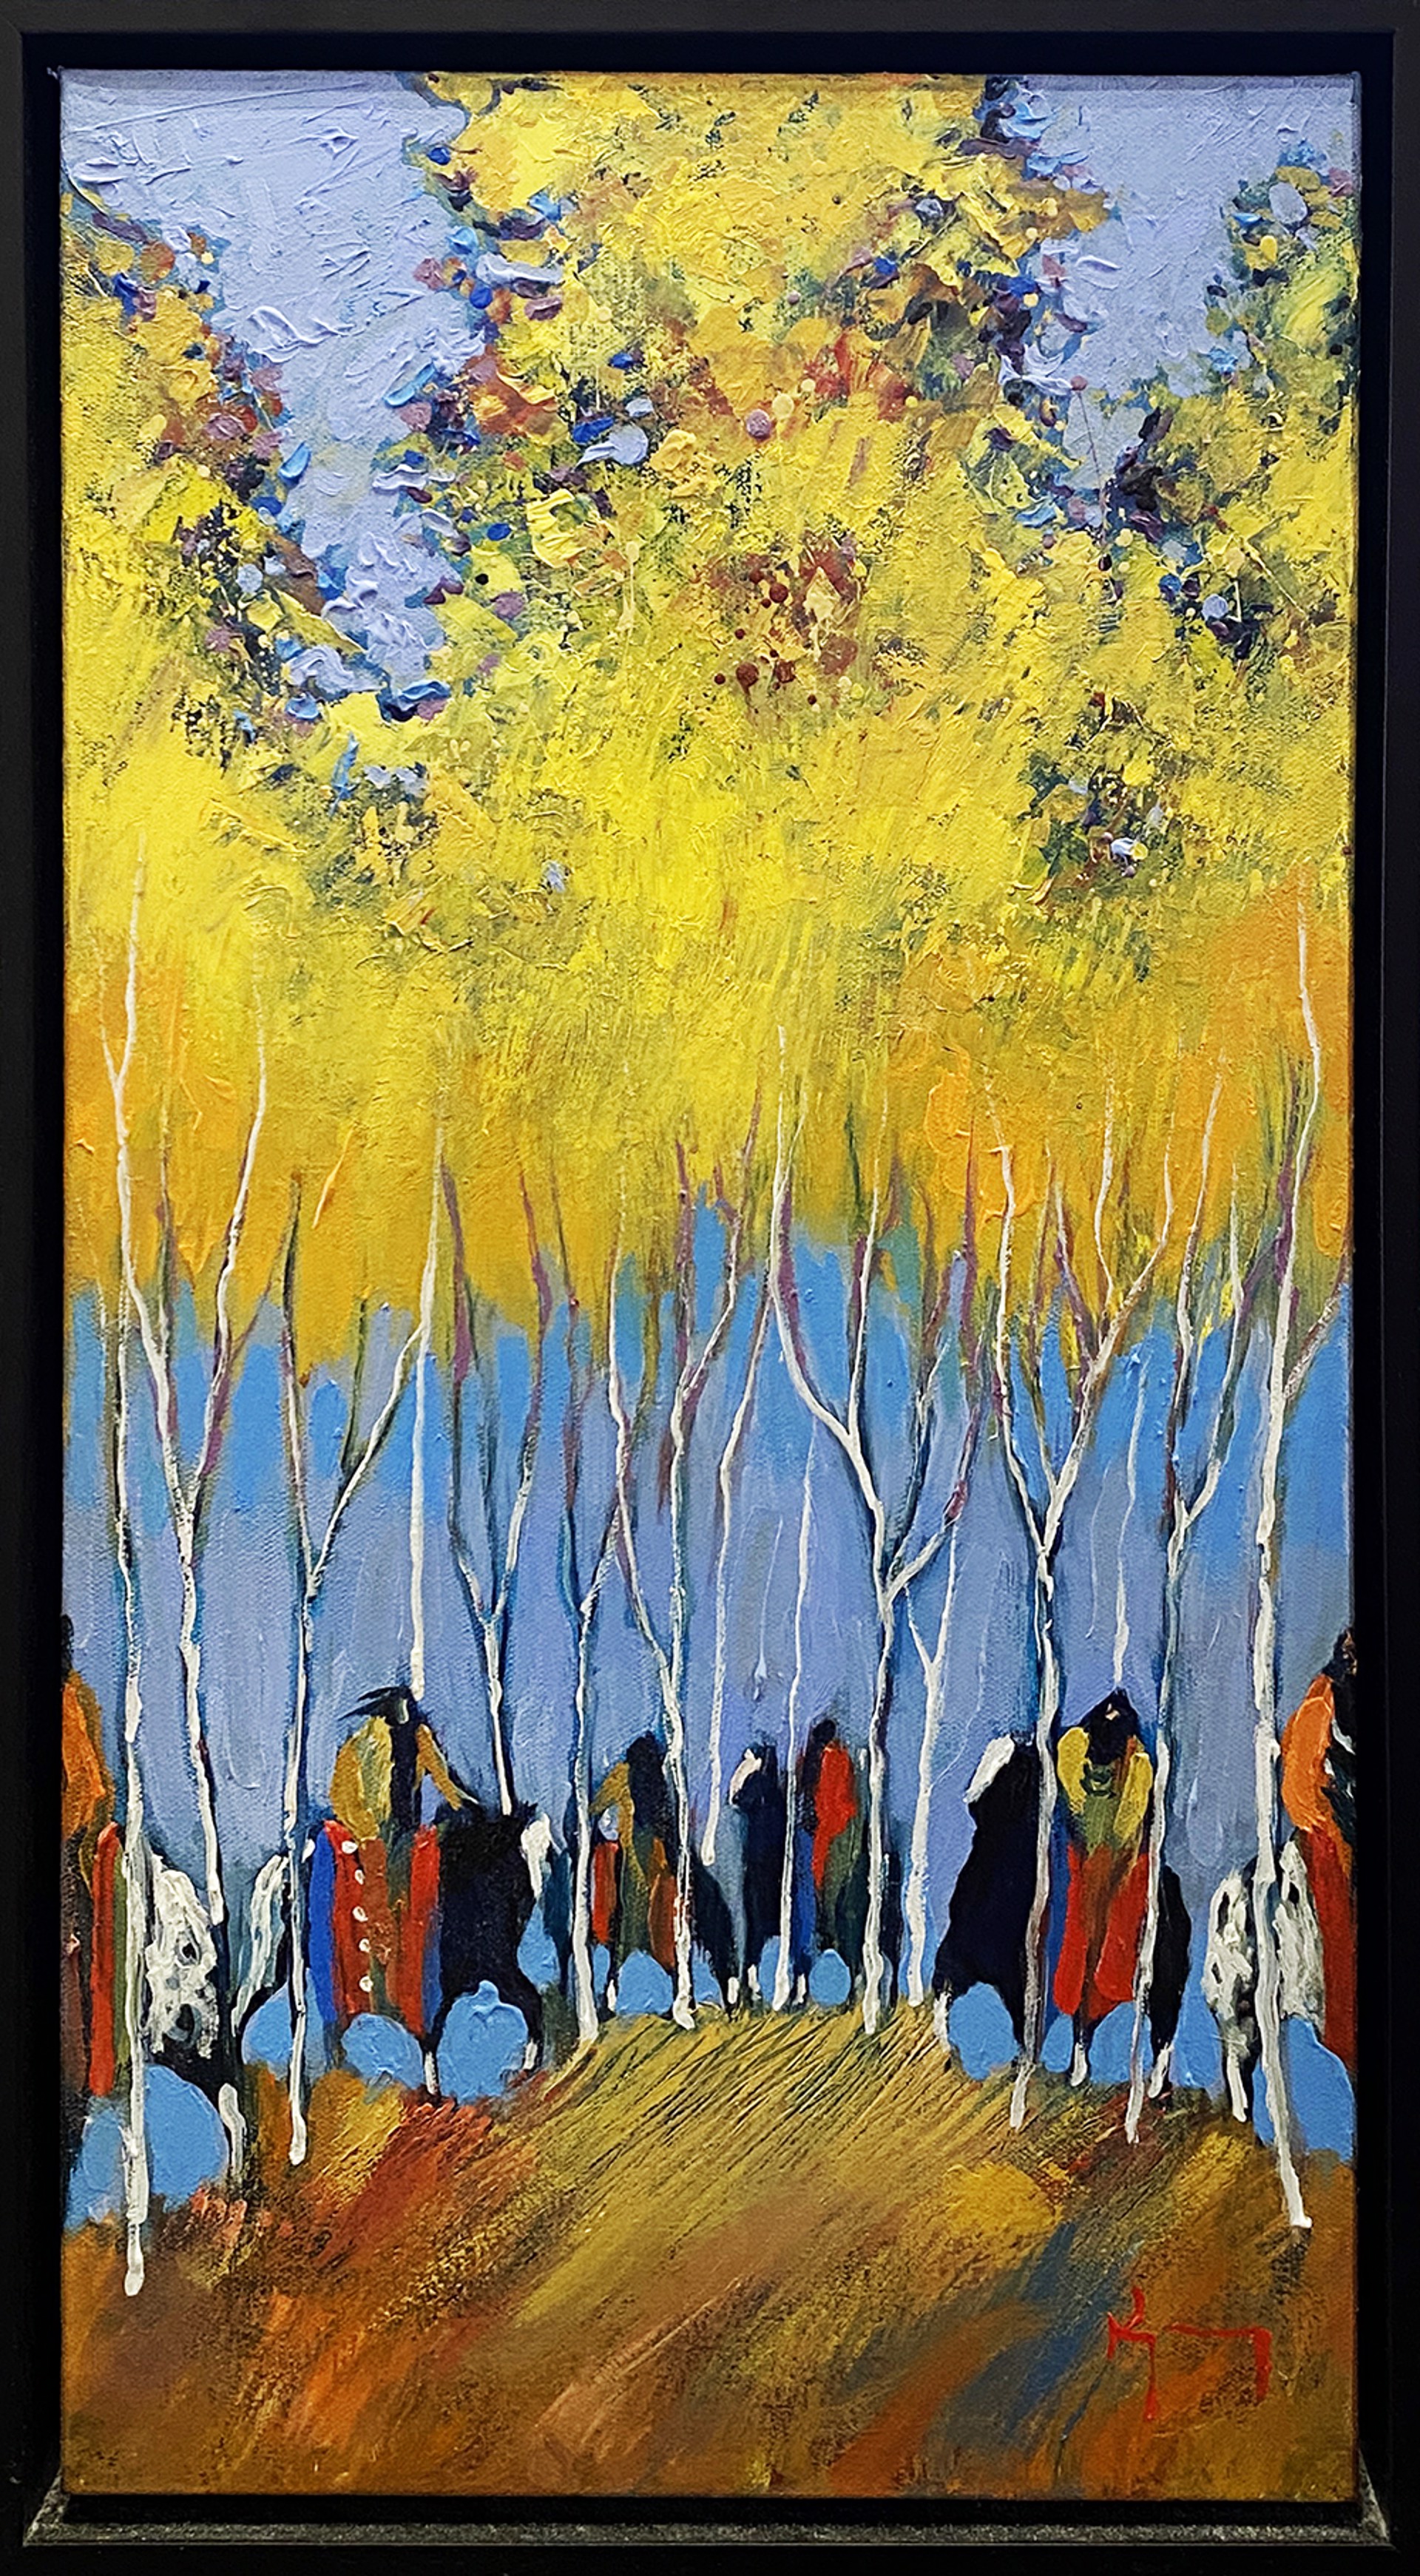 Mystics in the Glow of the Aspens by Bruce King